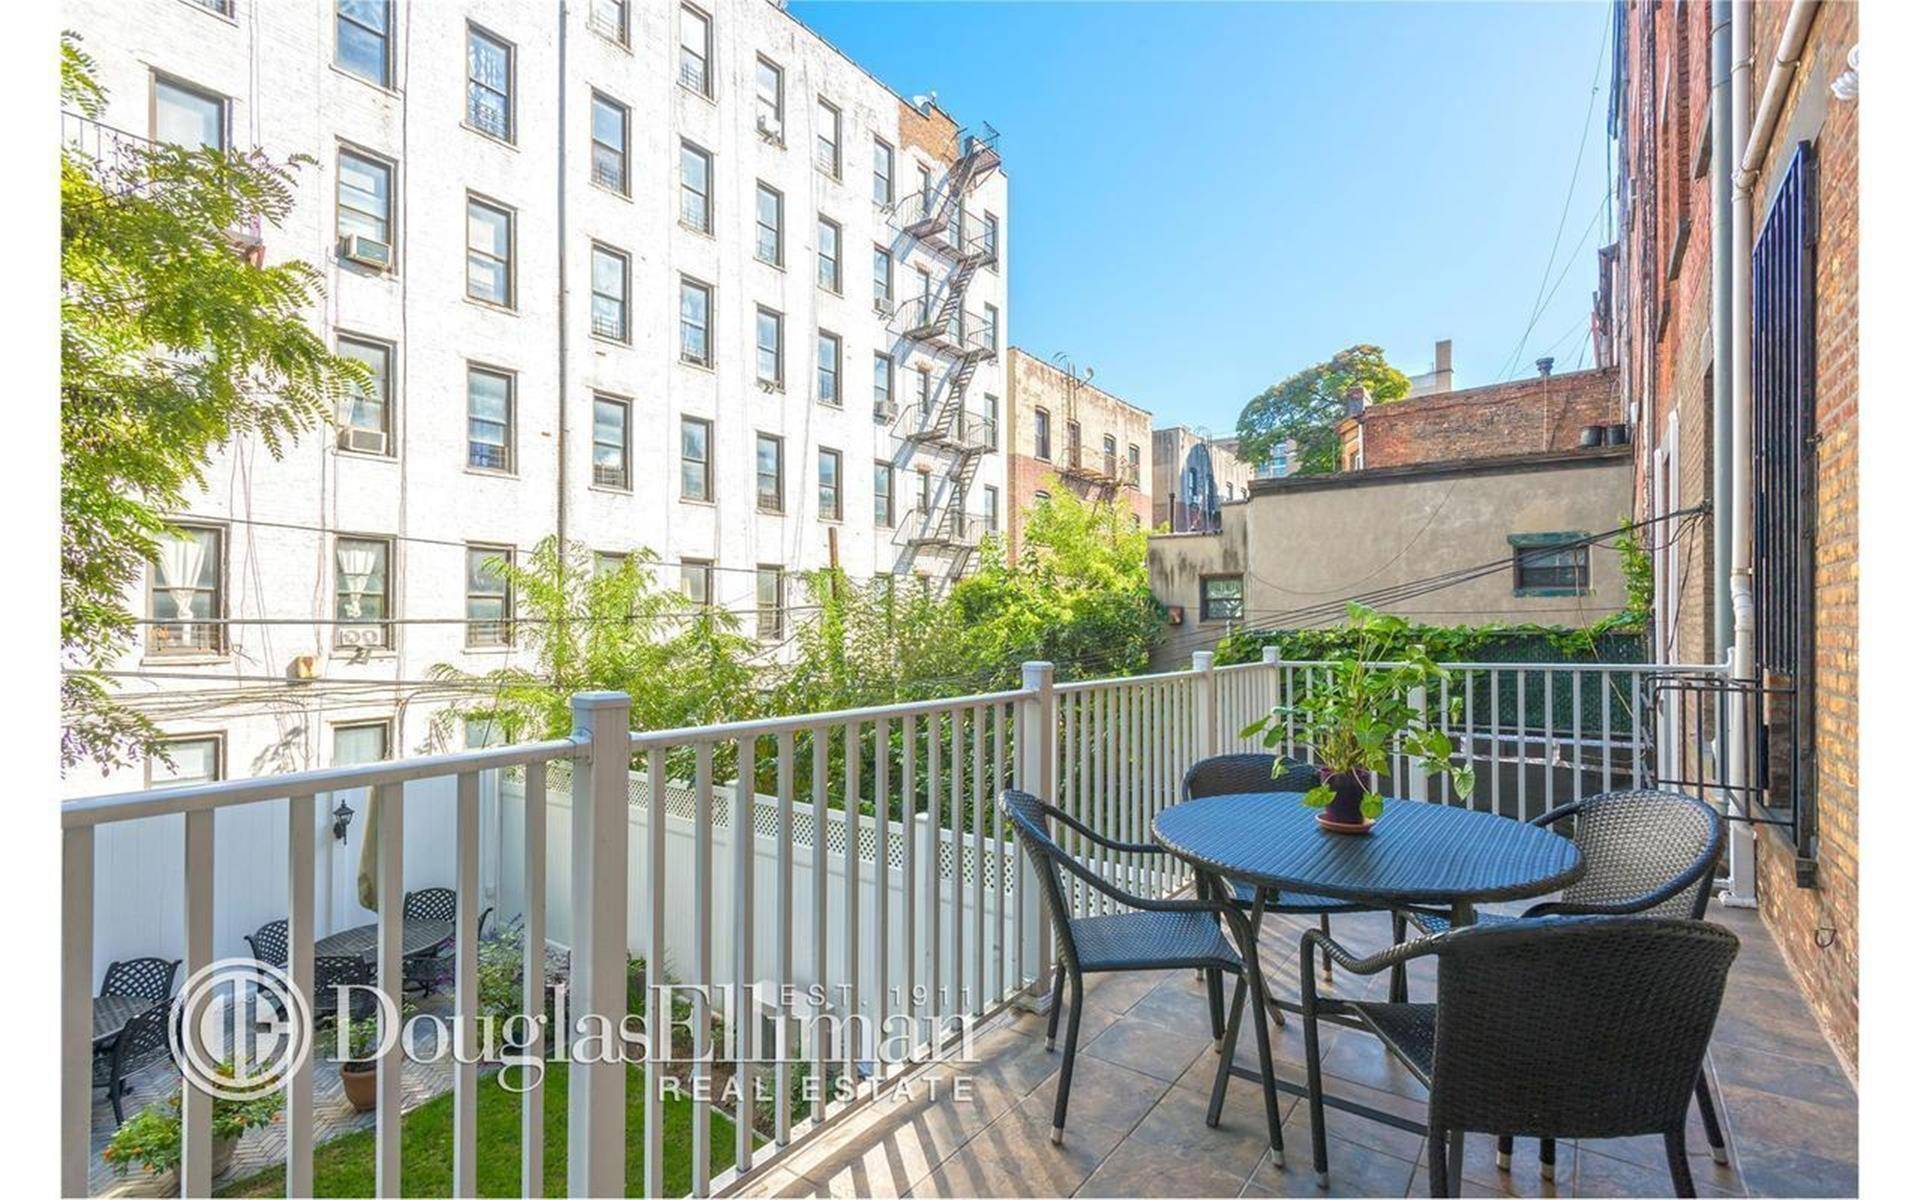 New Price ! Looking for a Condo with Charm and private outside space in a great location.